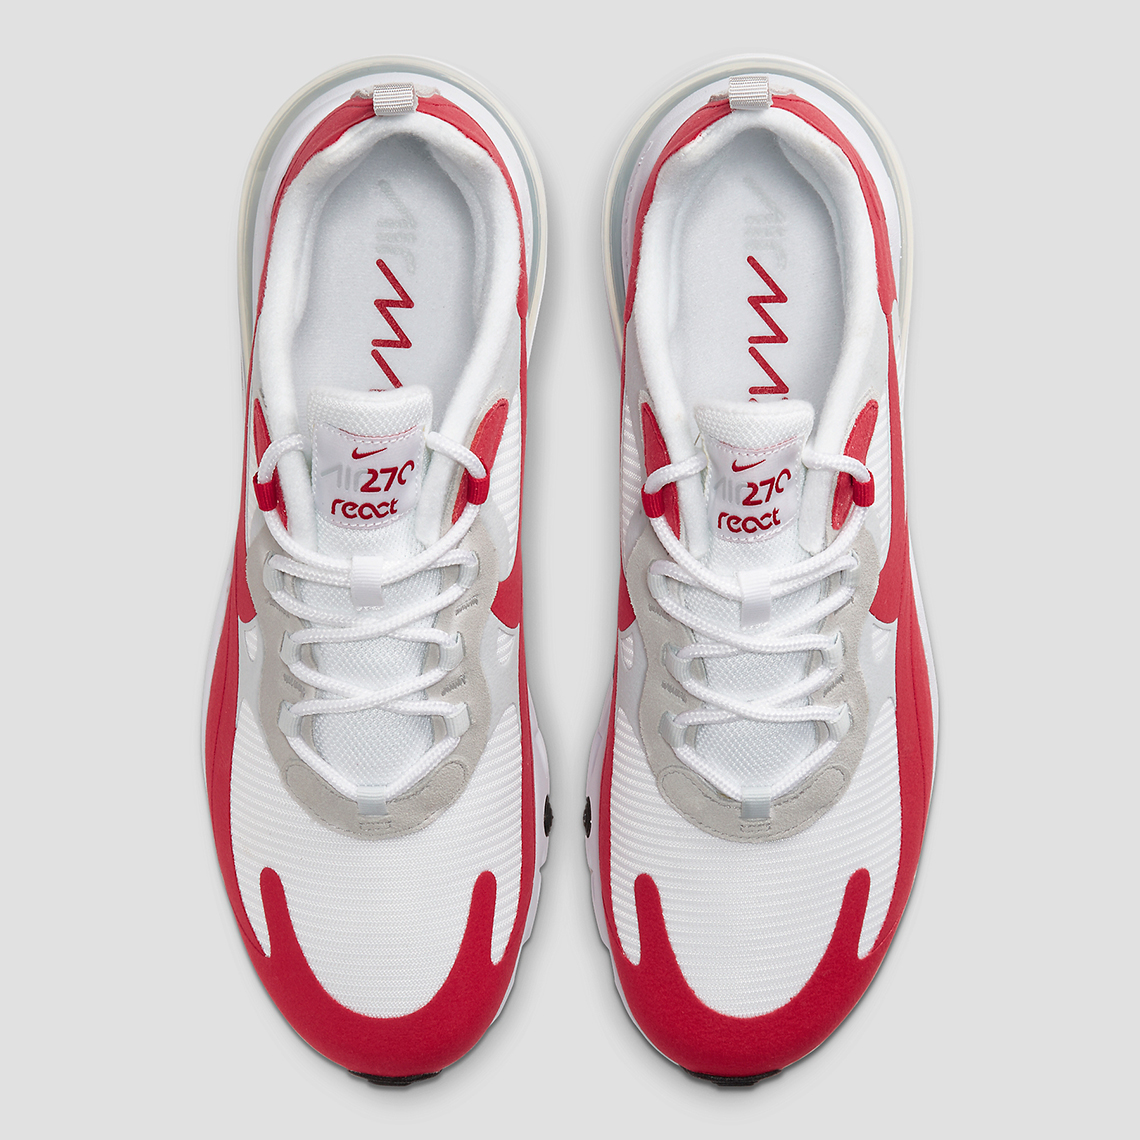 nike air max 270 react white and red